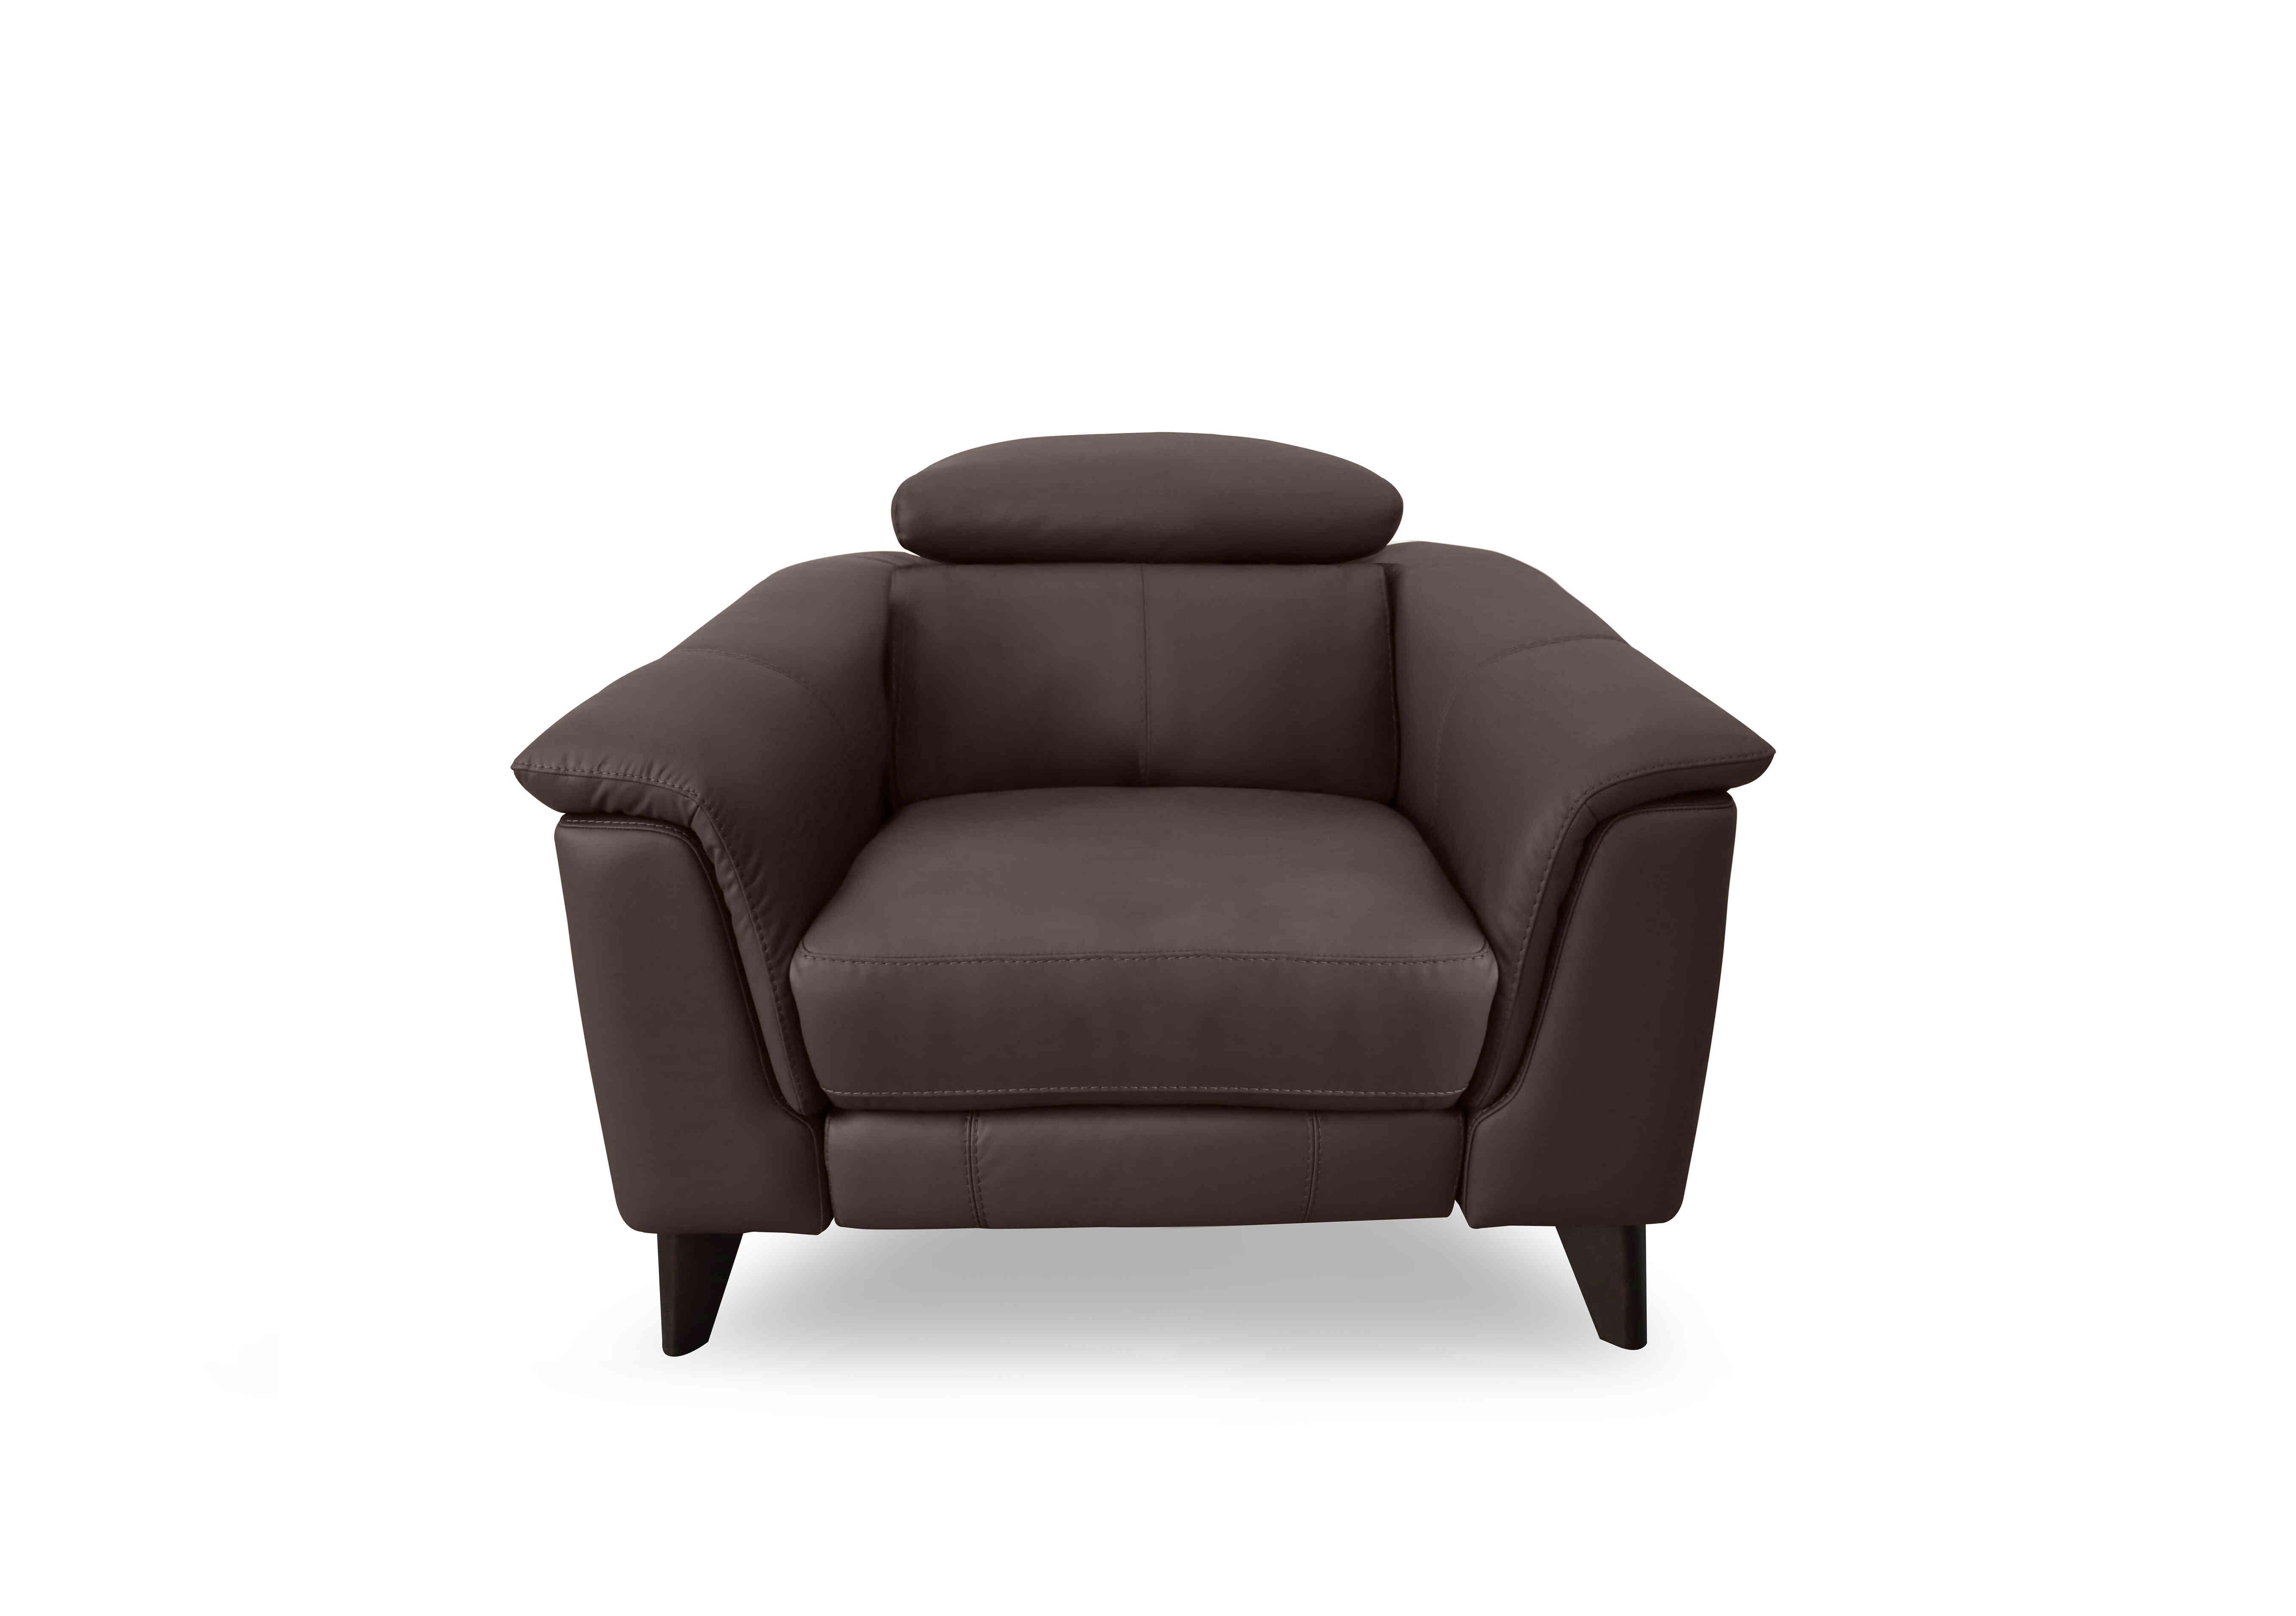 Wade Leather Chair in Nw-512e Cacao on Furniture Village